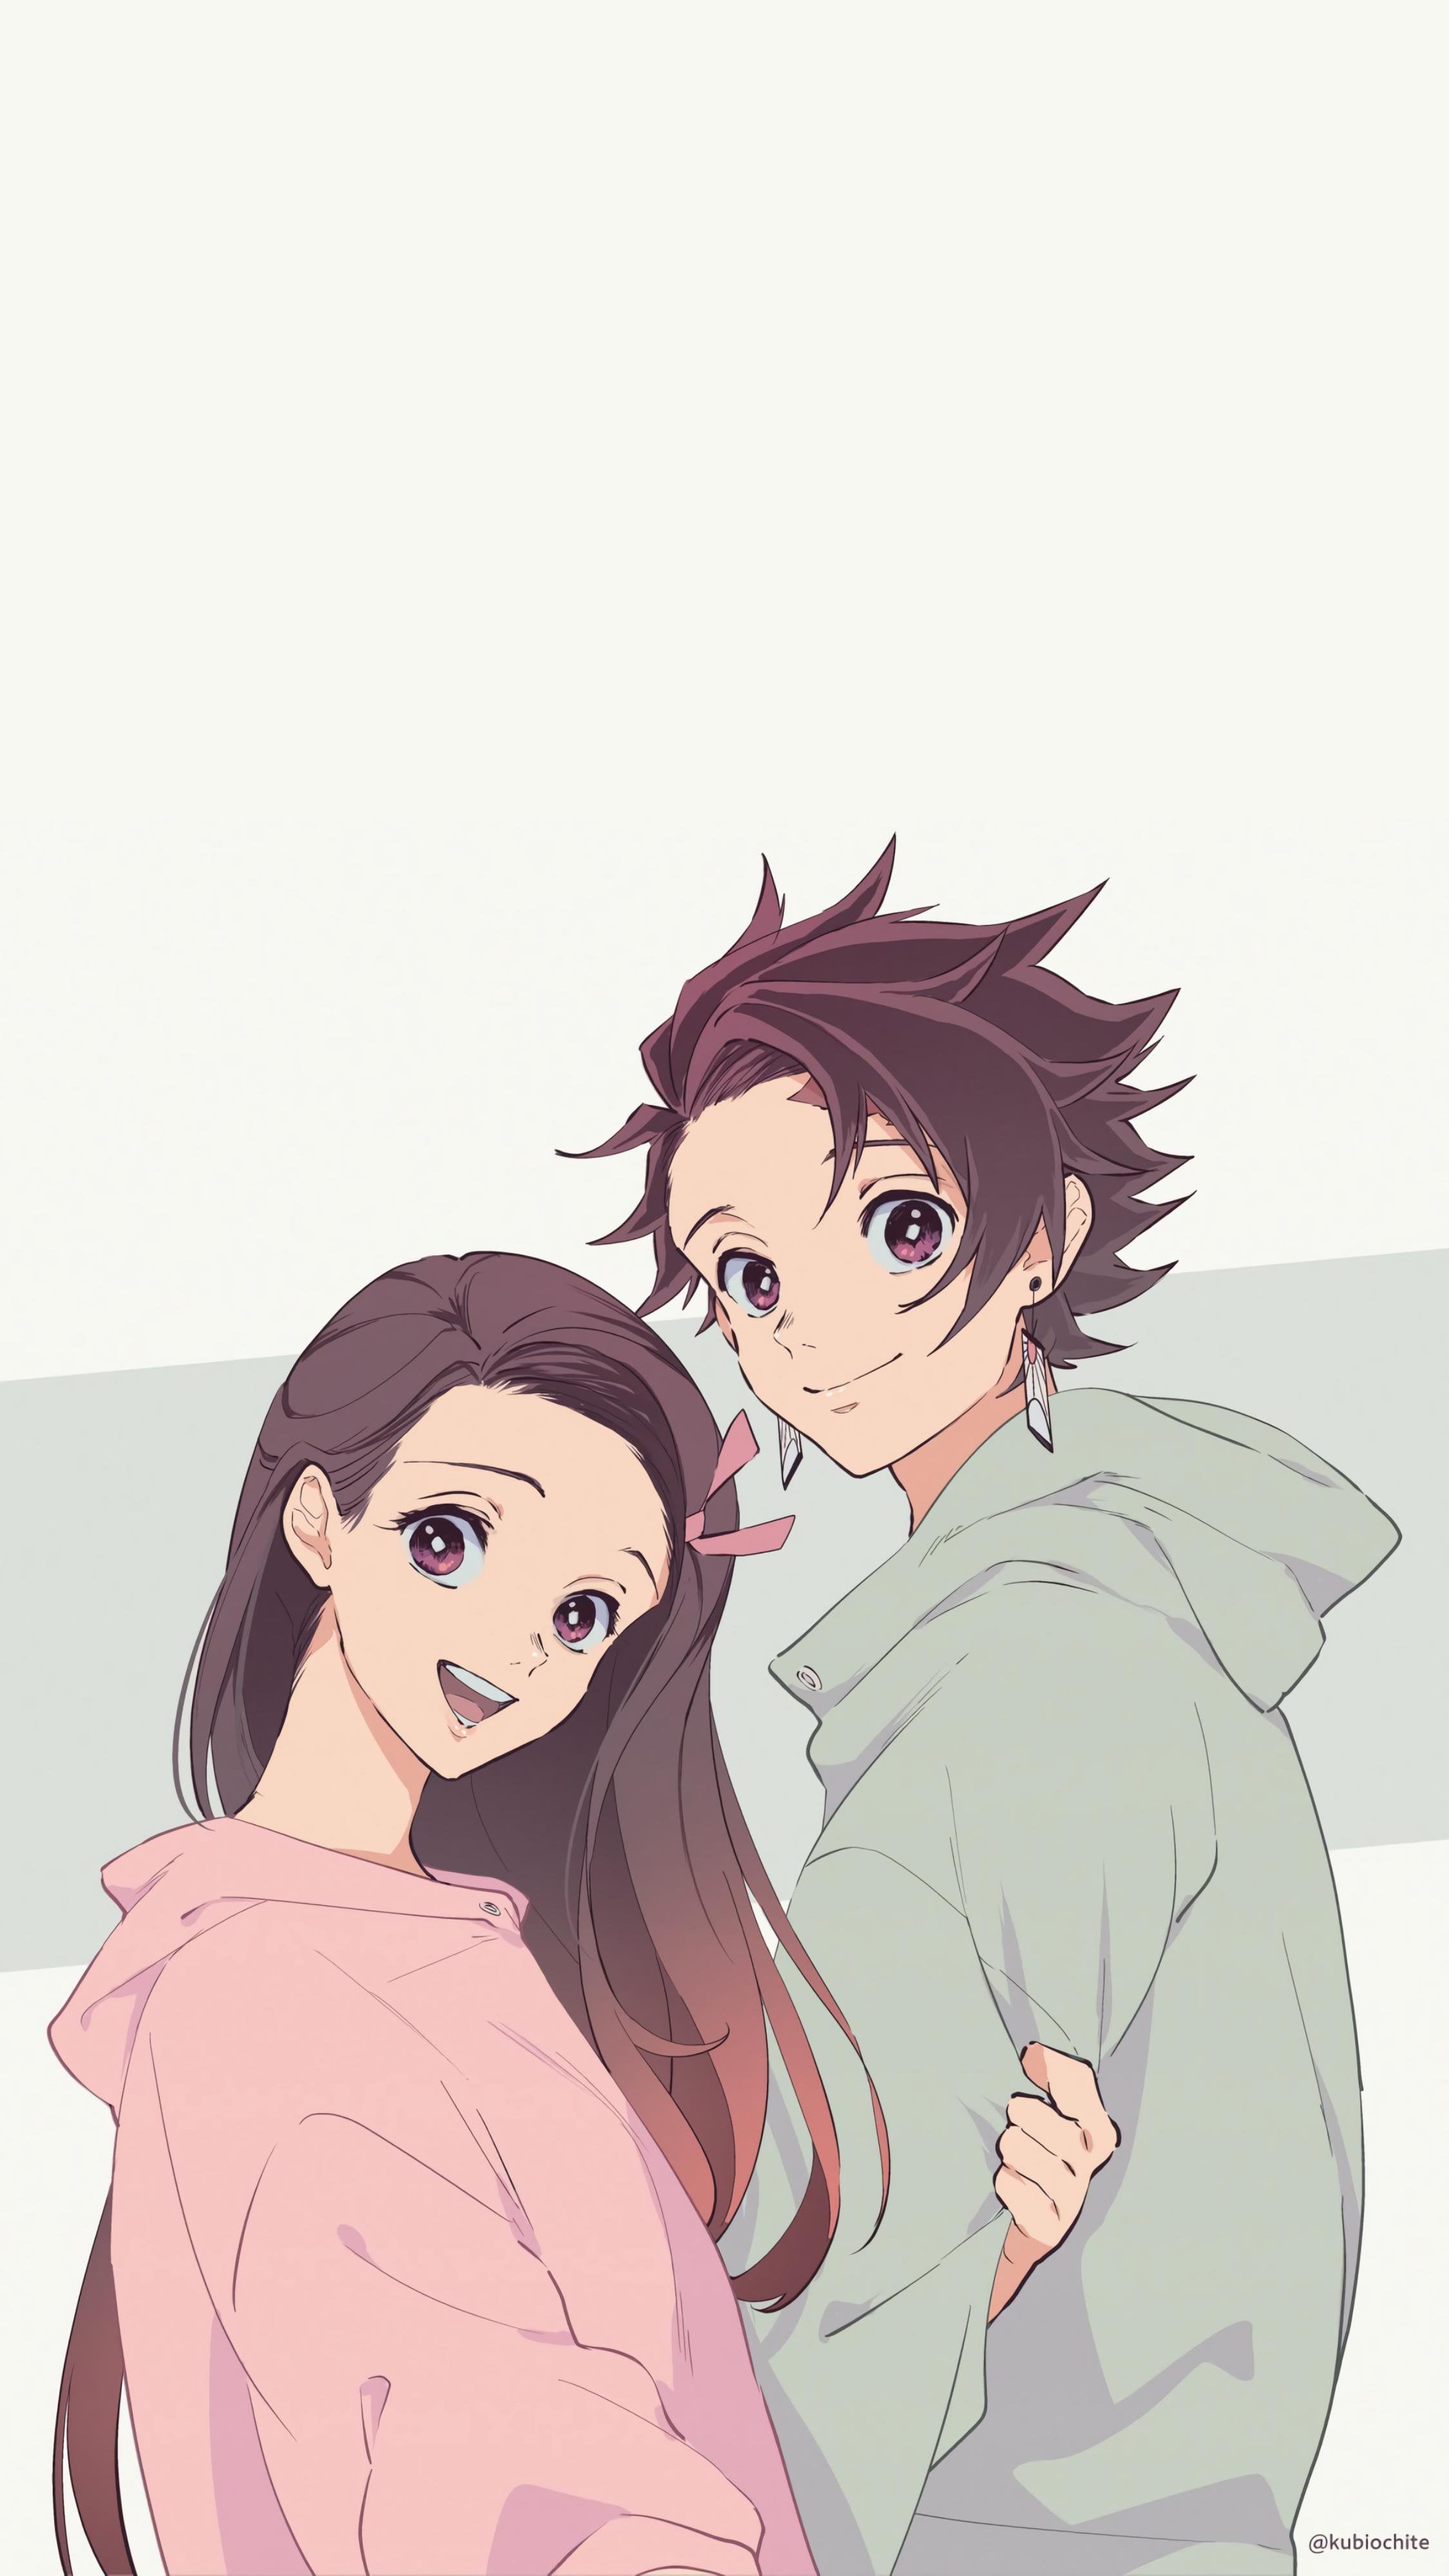 The best siblings in anime by gokulogan785 on DeviantArt-demhanvico.com.vn